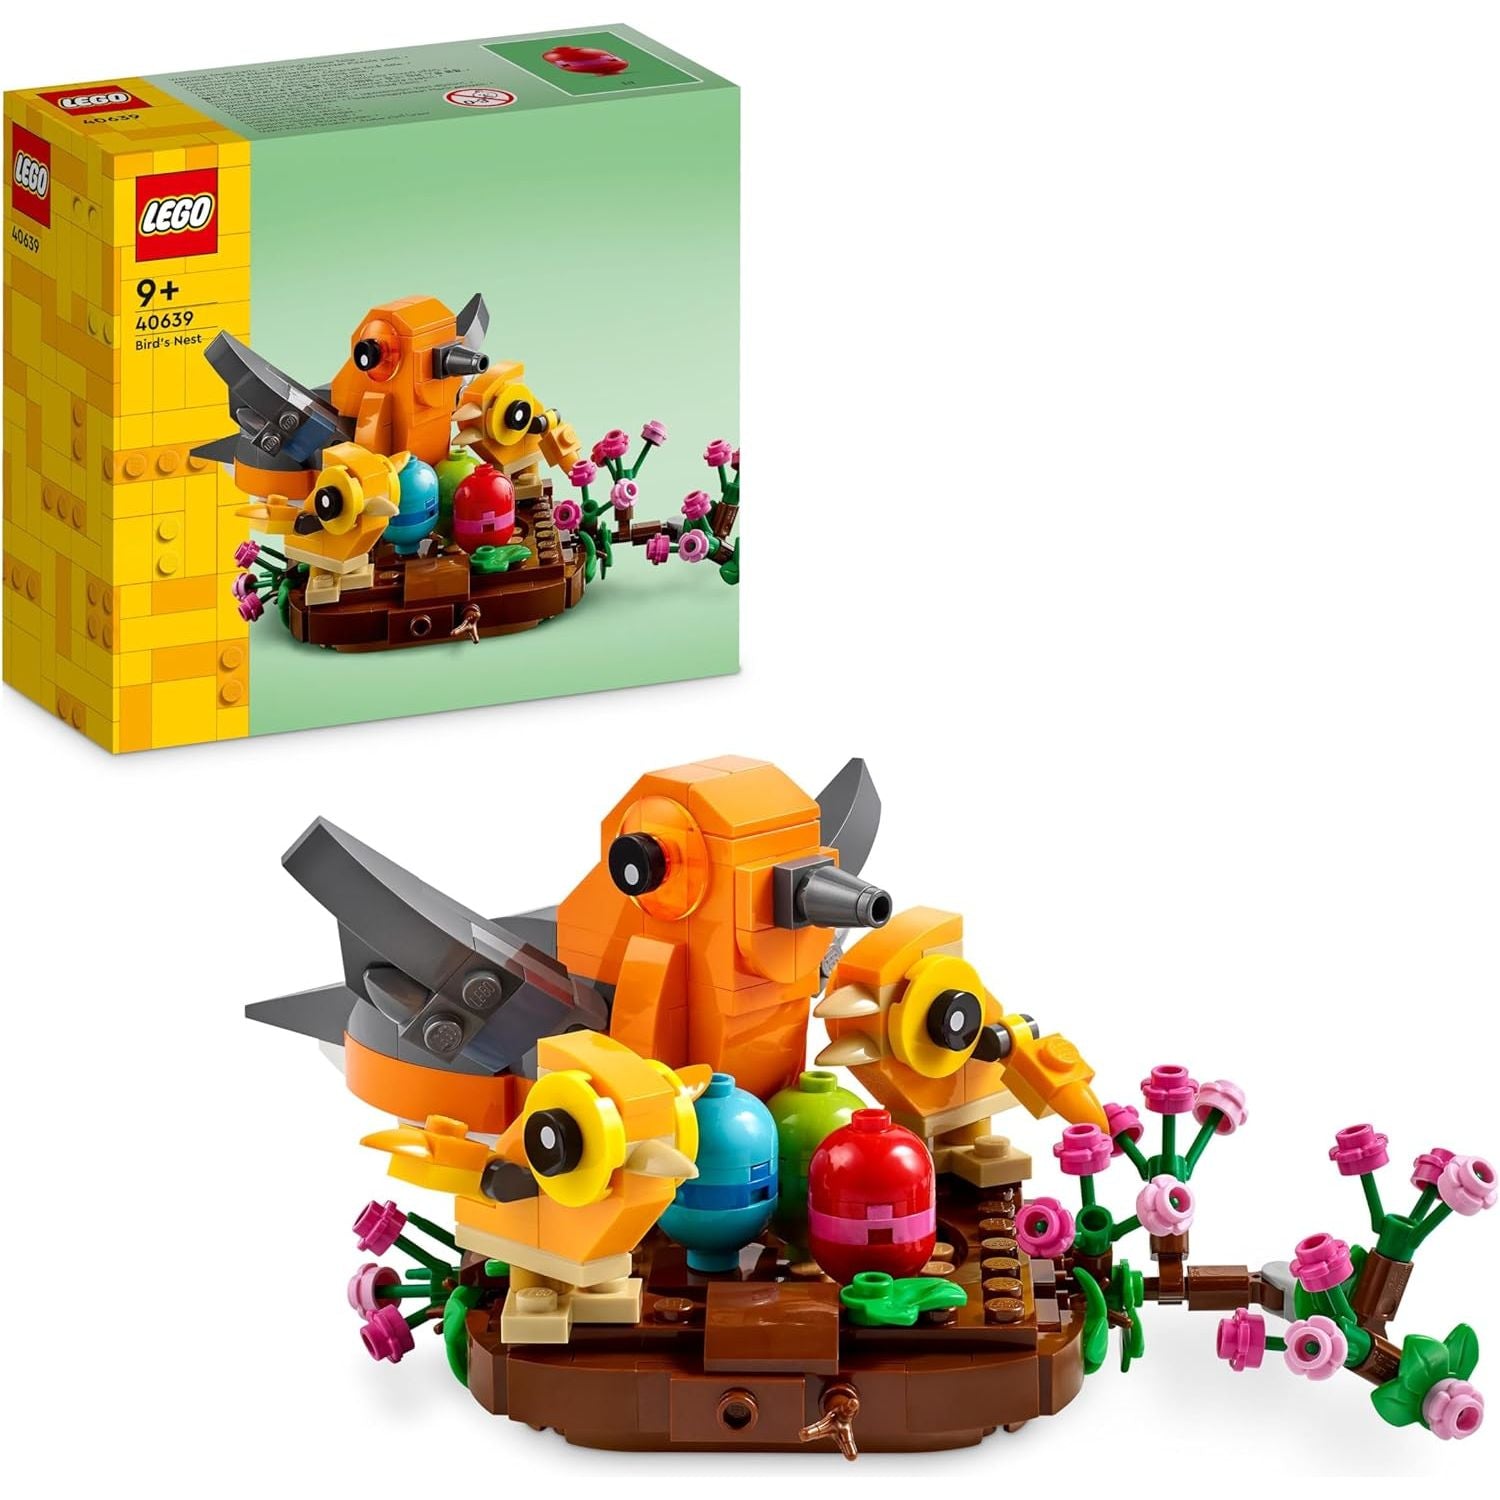 LEGO 40639 Bird’s Nest Building Toy Kit, Makes a Great Easter Basket Filler and Easter Gift.